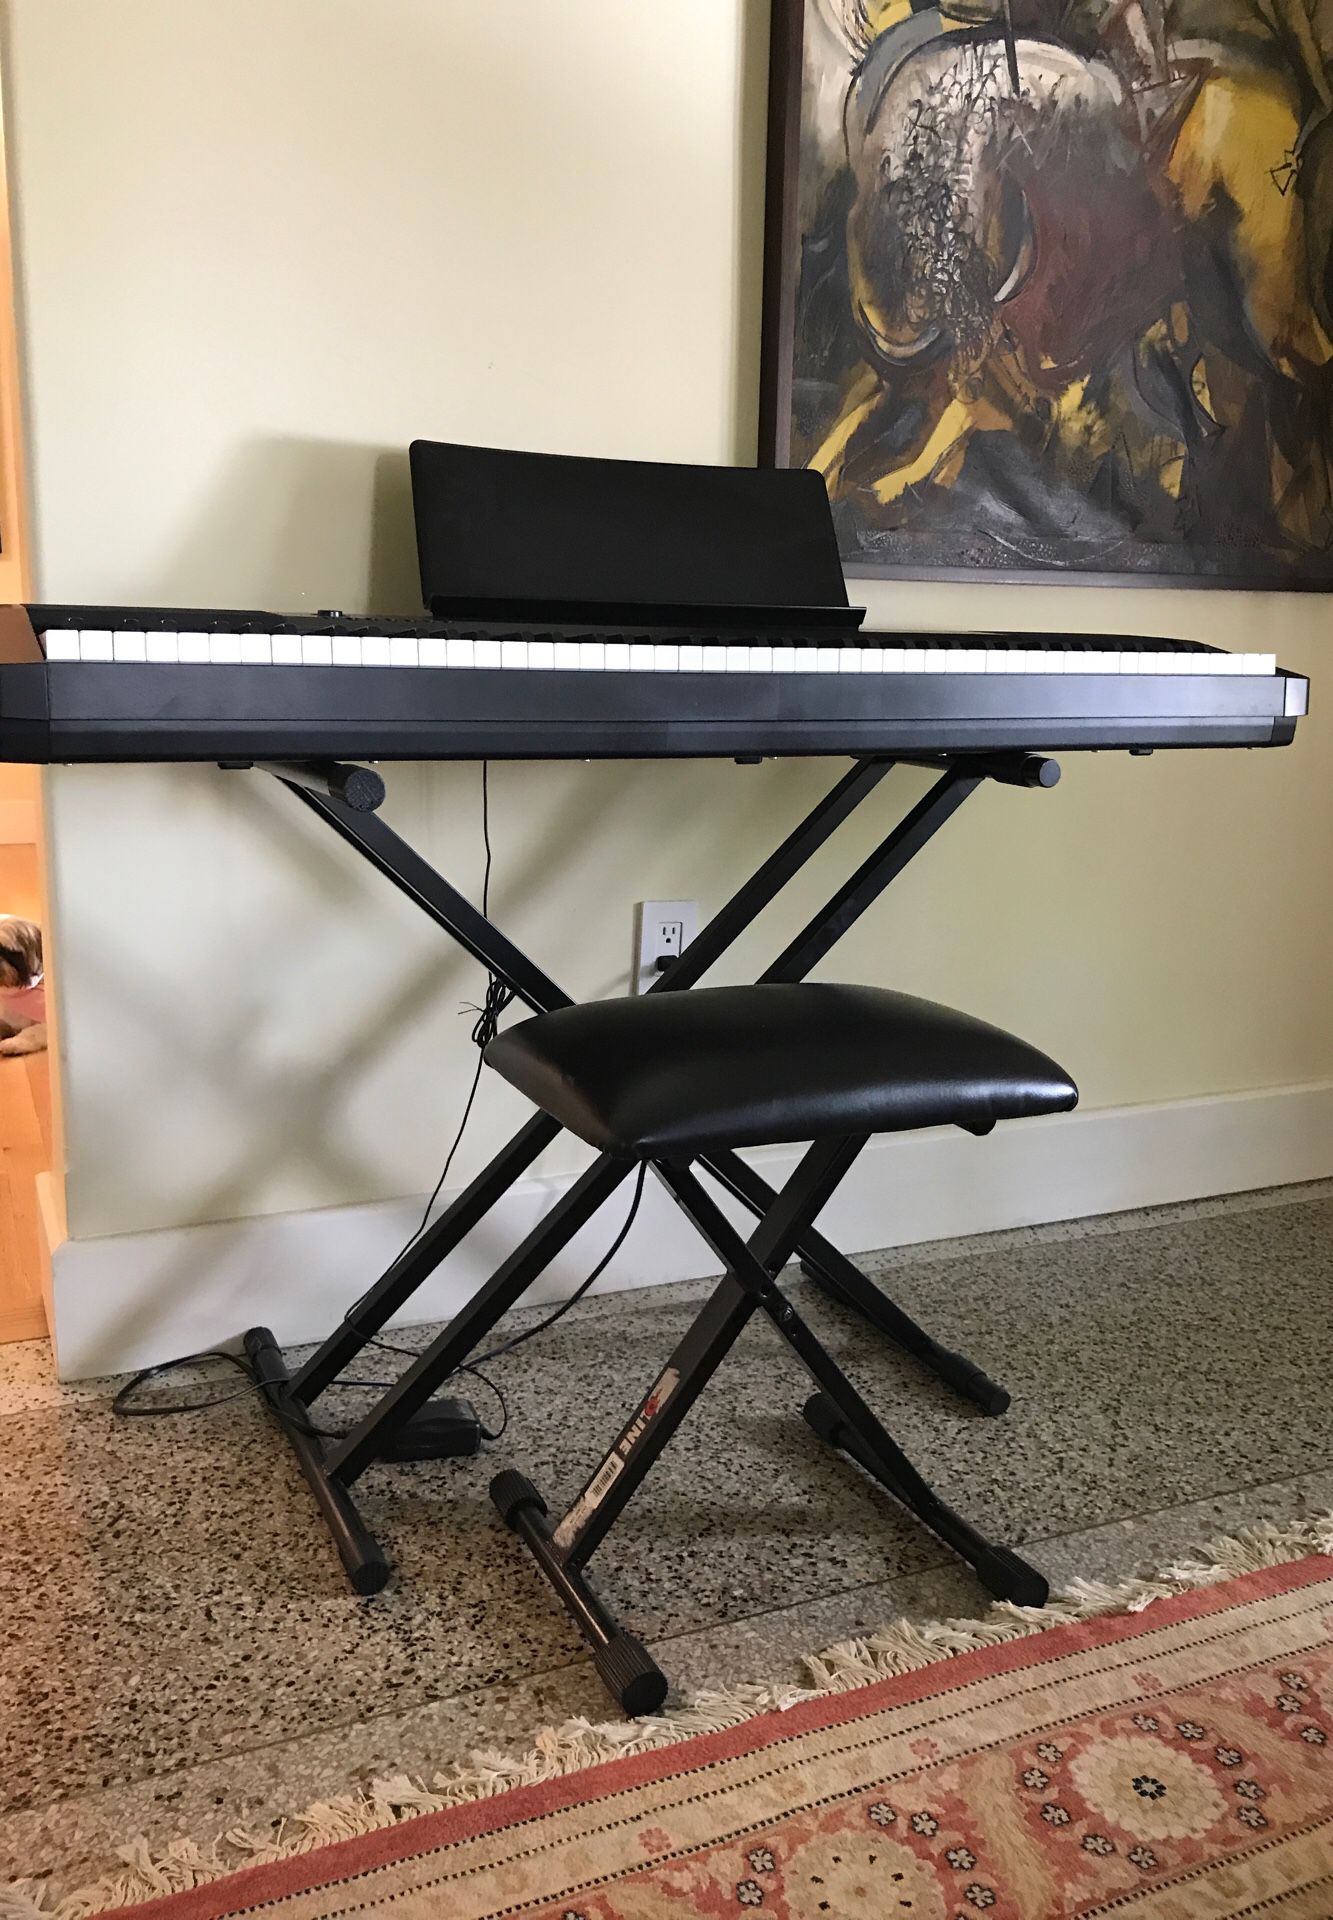 Casio key board. W/pedal and stand with bench